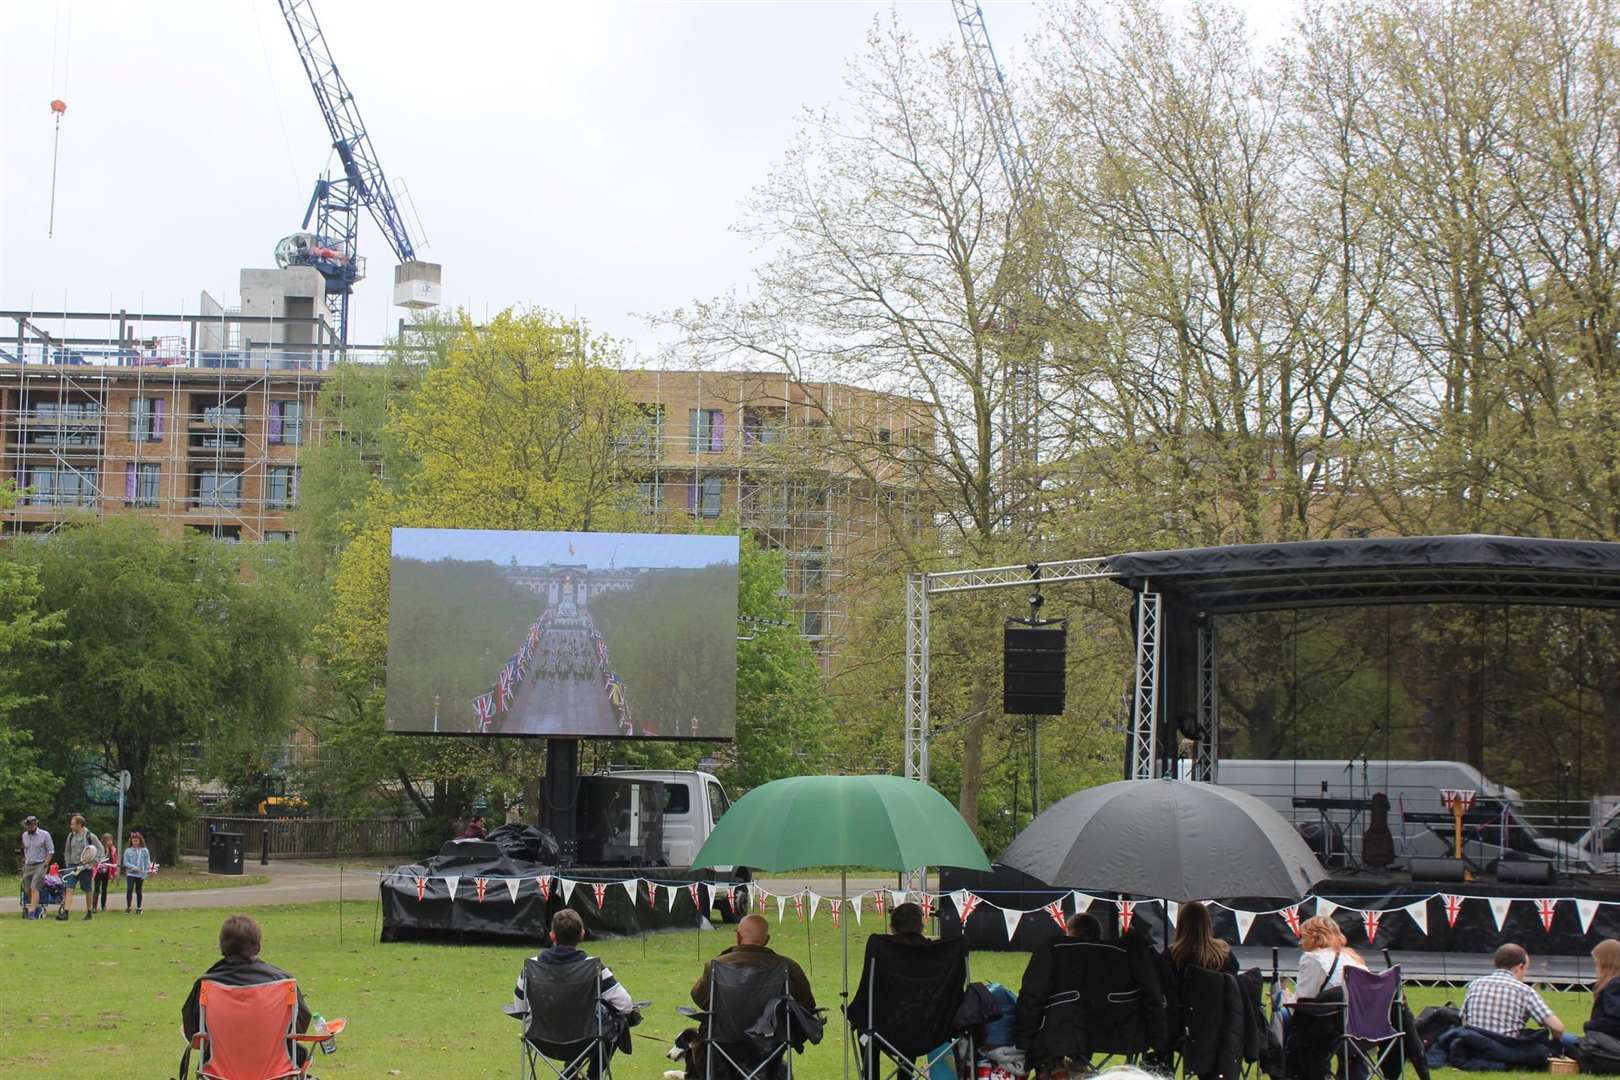 Ashford Borough Council hosted a live screening of the coronation in Victoria Park